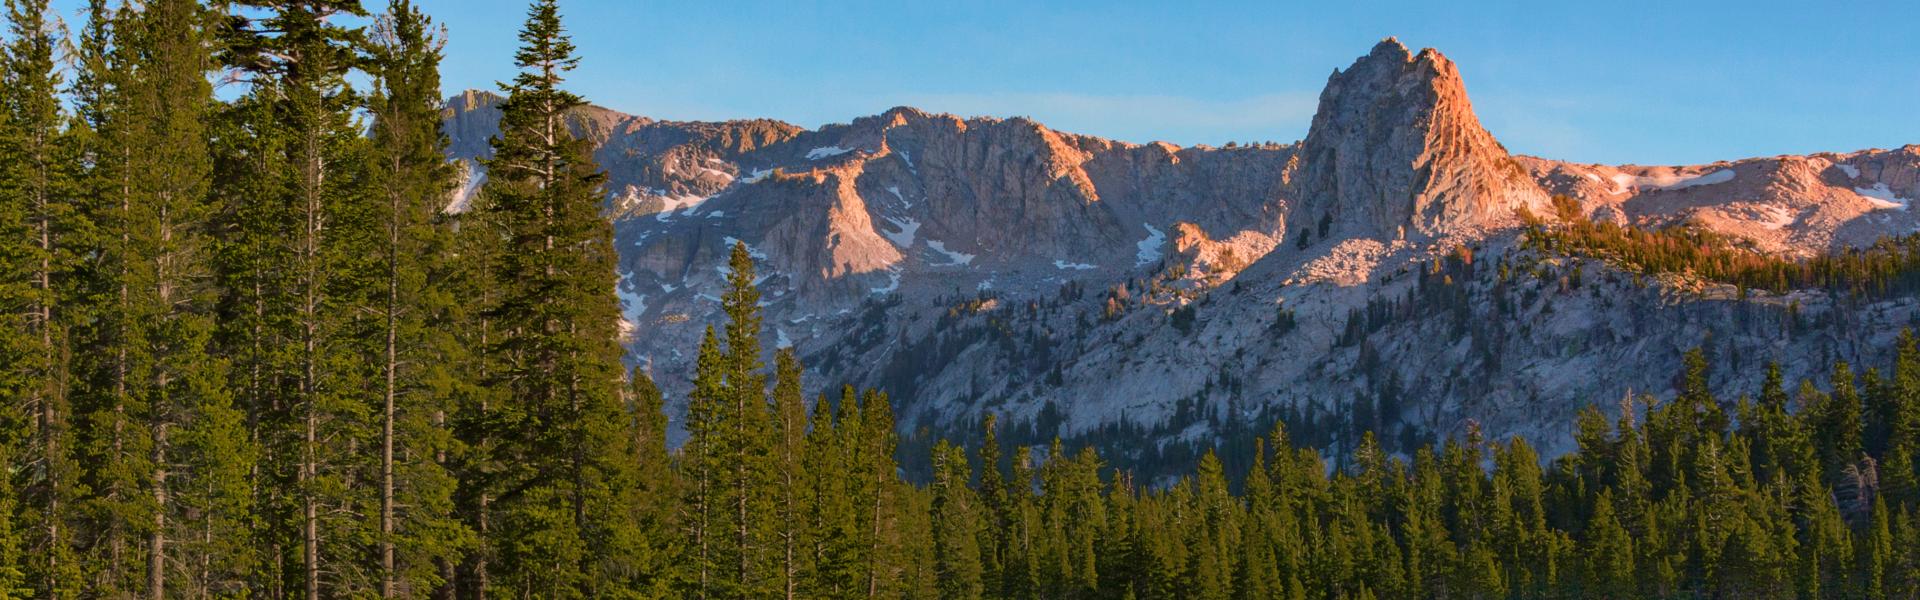 Lodging & Cabins in Mammoth Lakes - HomeToGo